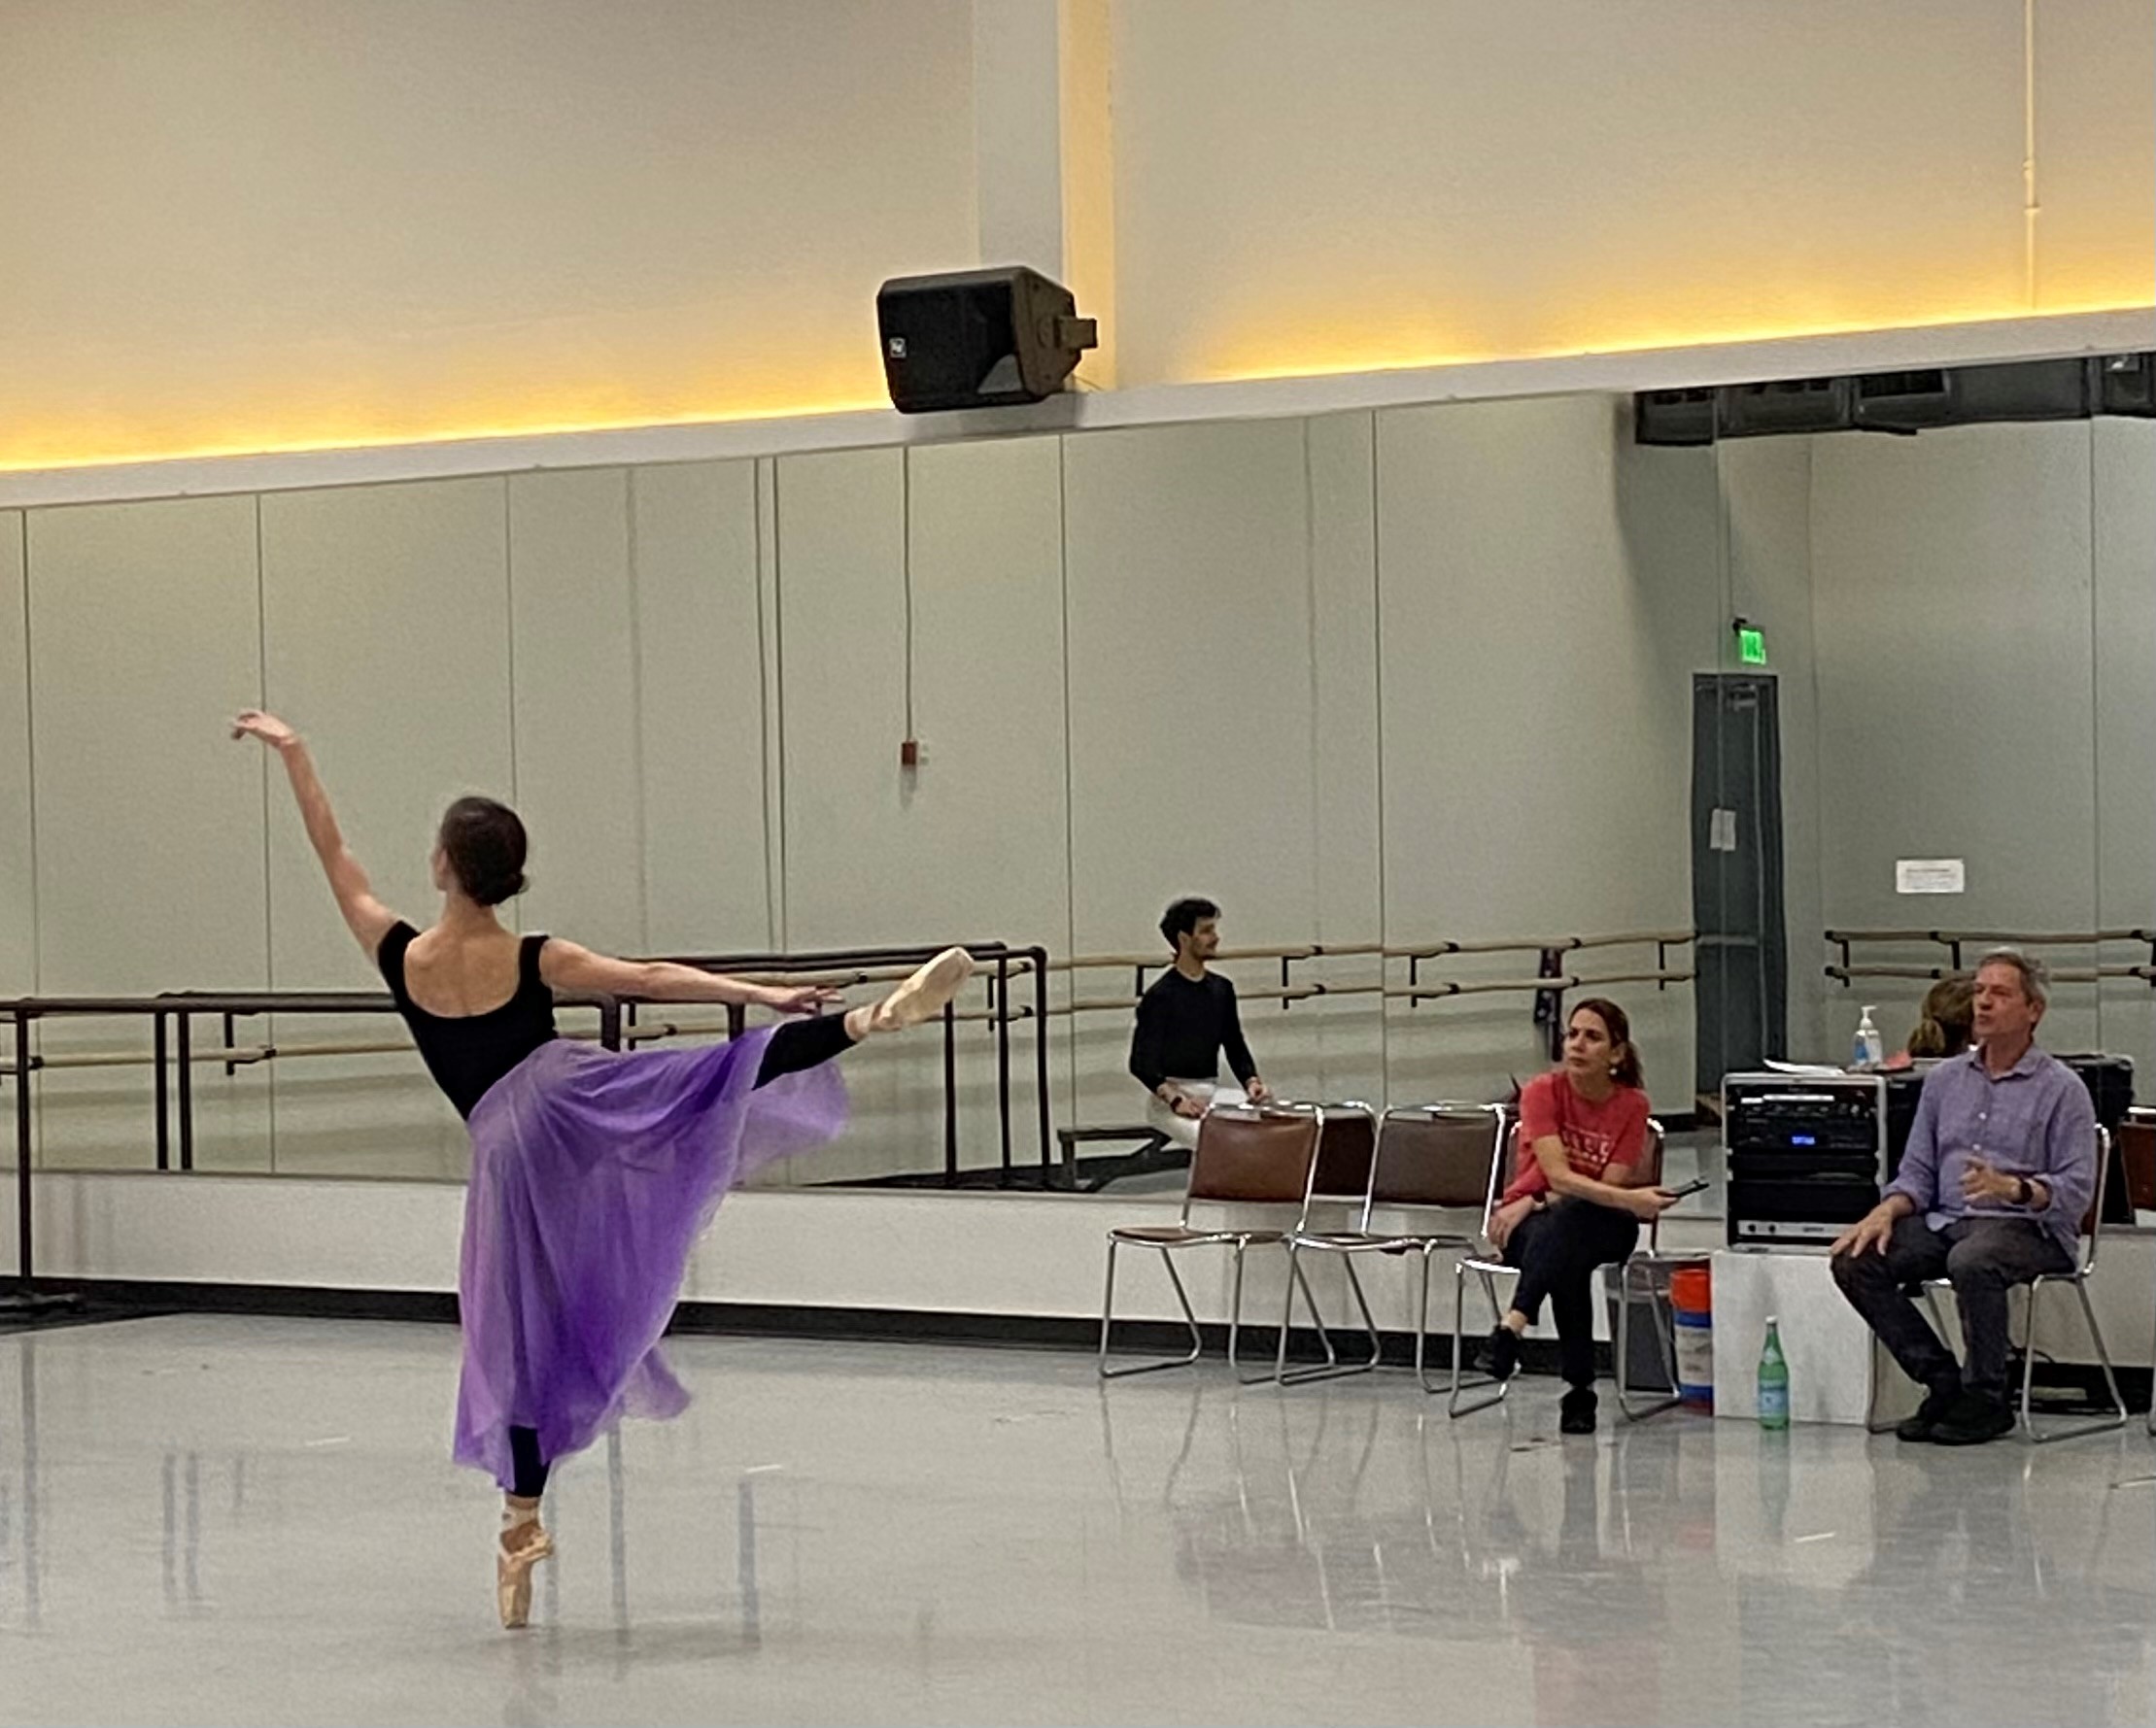 Behind-The-Scenes of Giselle with Ib Andersen